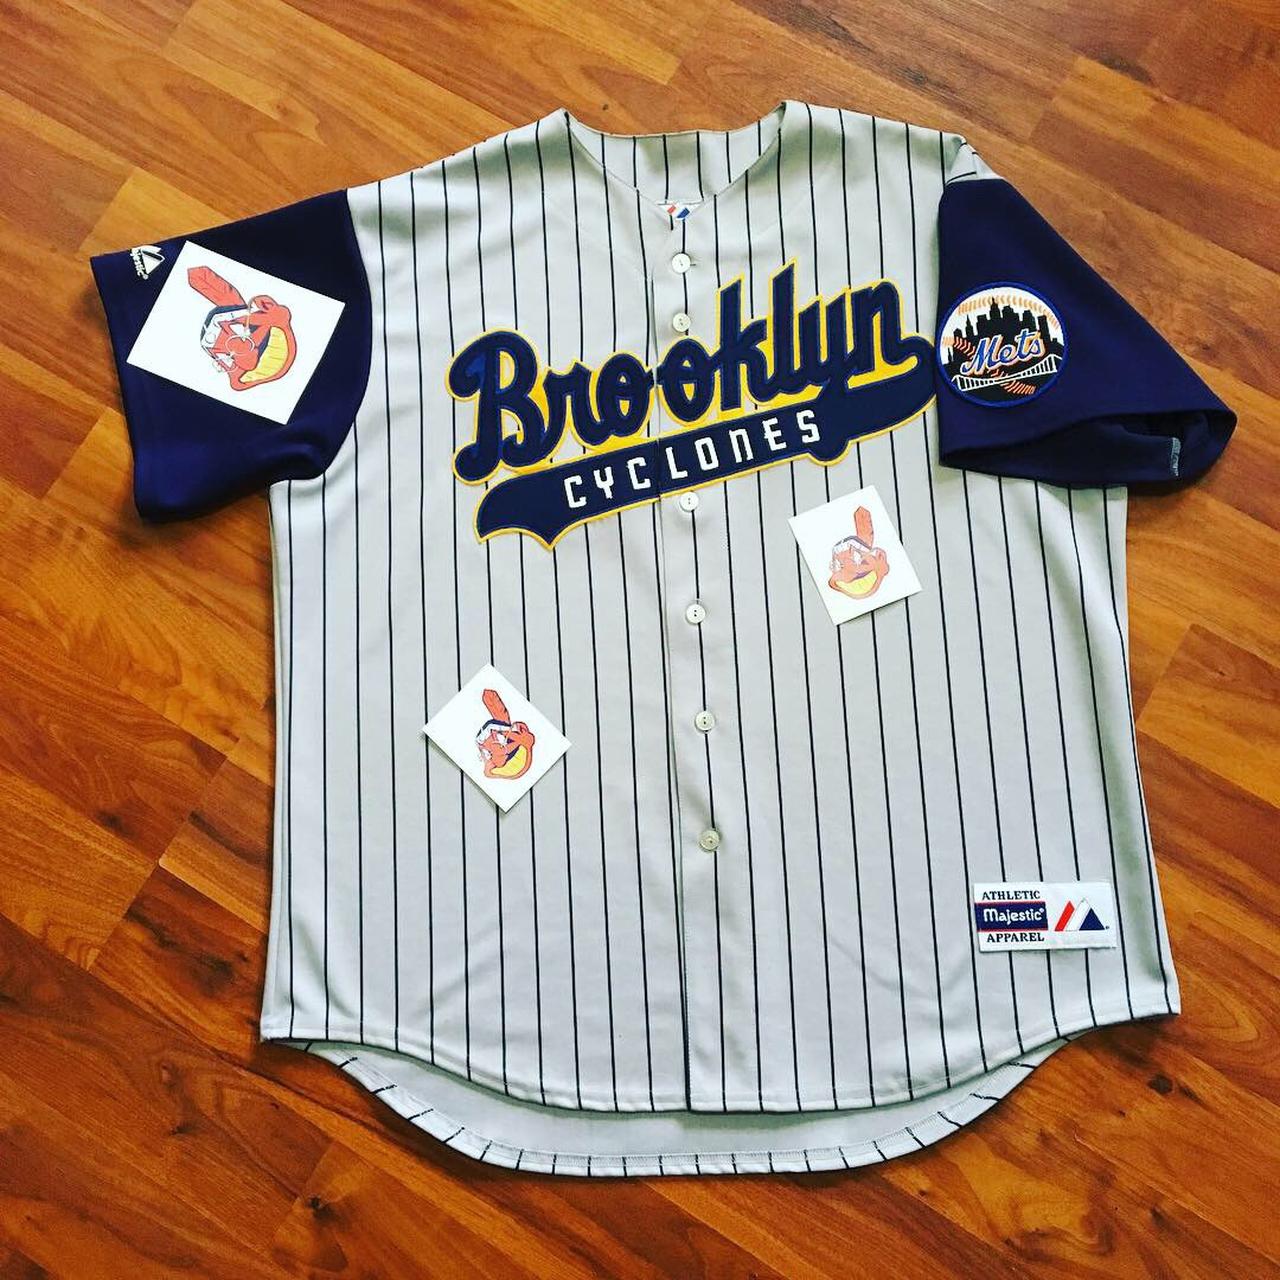 VTG Brooklyn Cyclones Gray Road Stitched Pinstriped Jersey 50 Rawlings MILB  Mets 